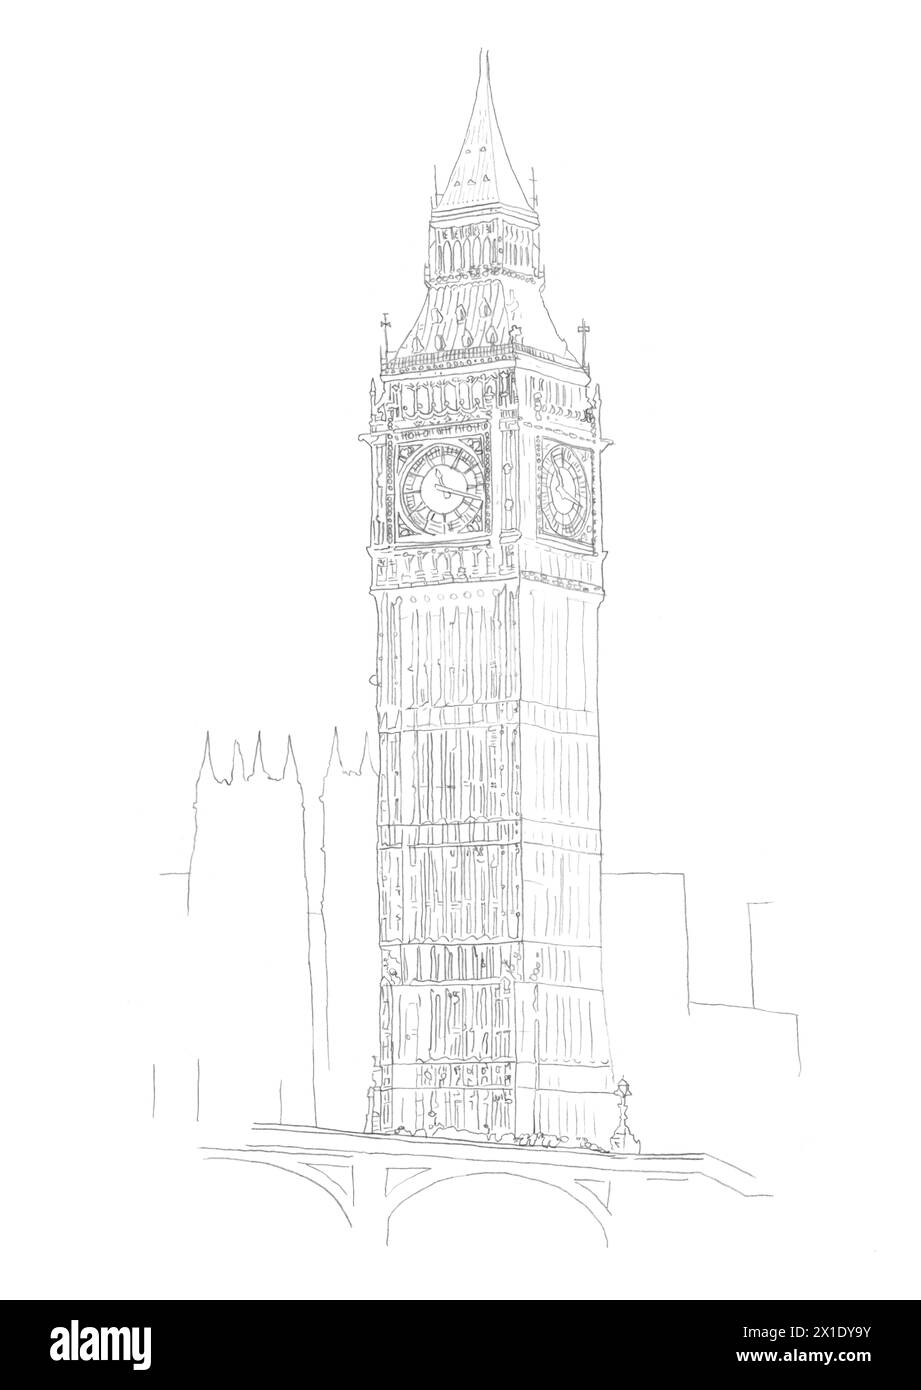 Architectural pencil drawing sketch of Big Ben / St Stephen's / Elizabeth Tower building in Westminster, London, UK Stock Photo